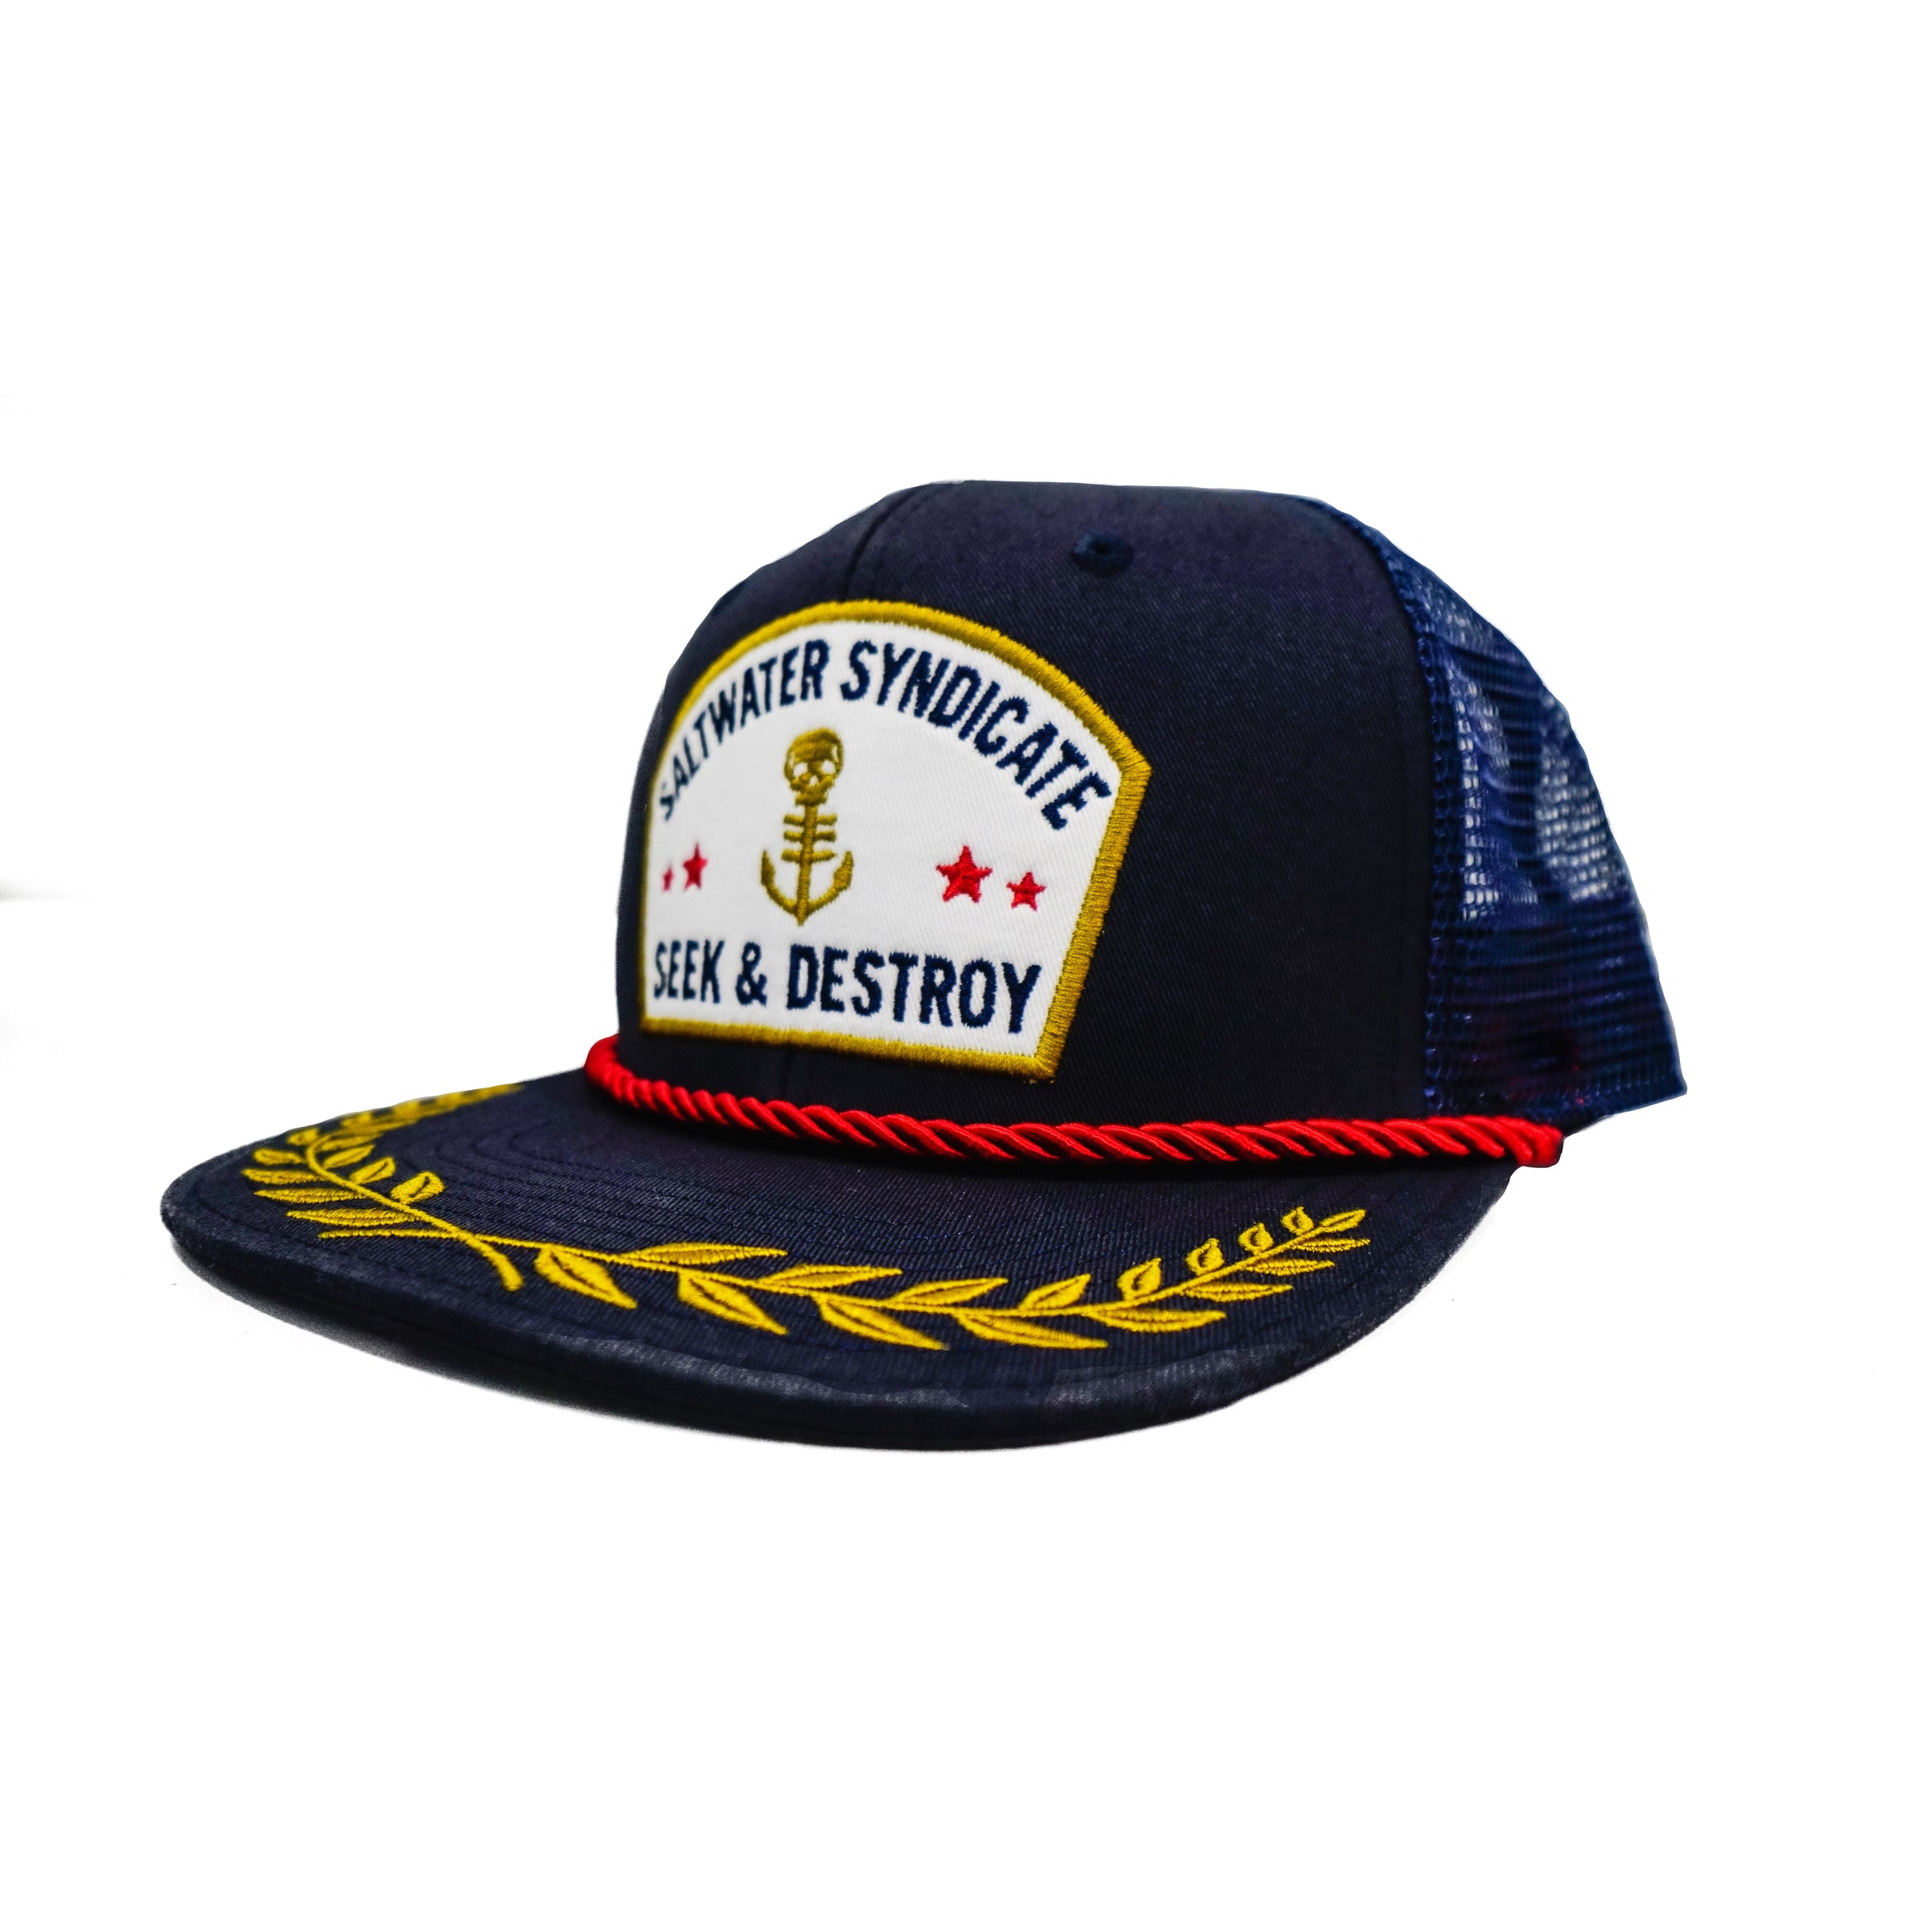 The Captain - Snapback hat – Saltwater Syndicate